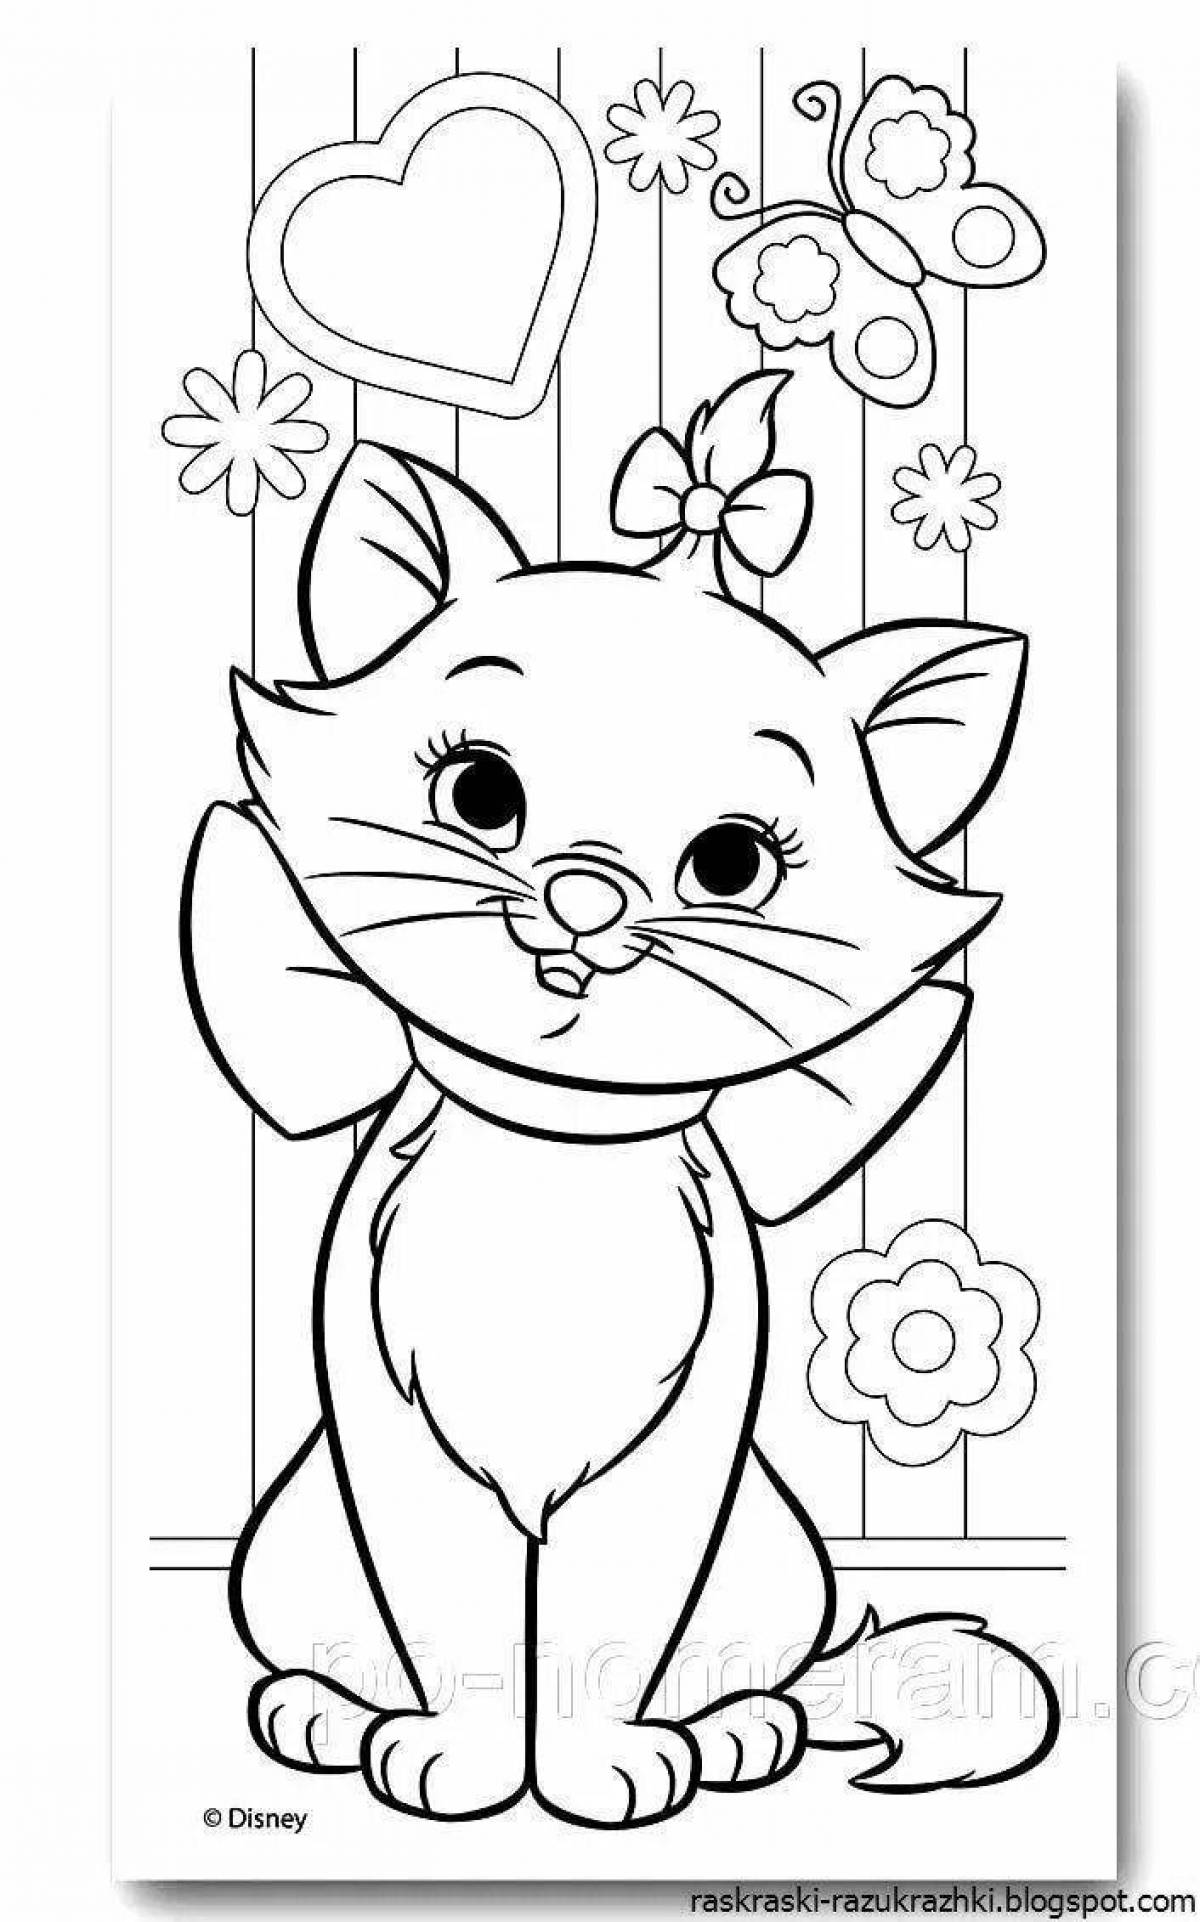 Coloring cute kitten for children 5-6 years old